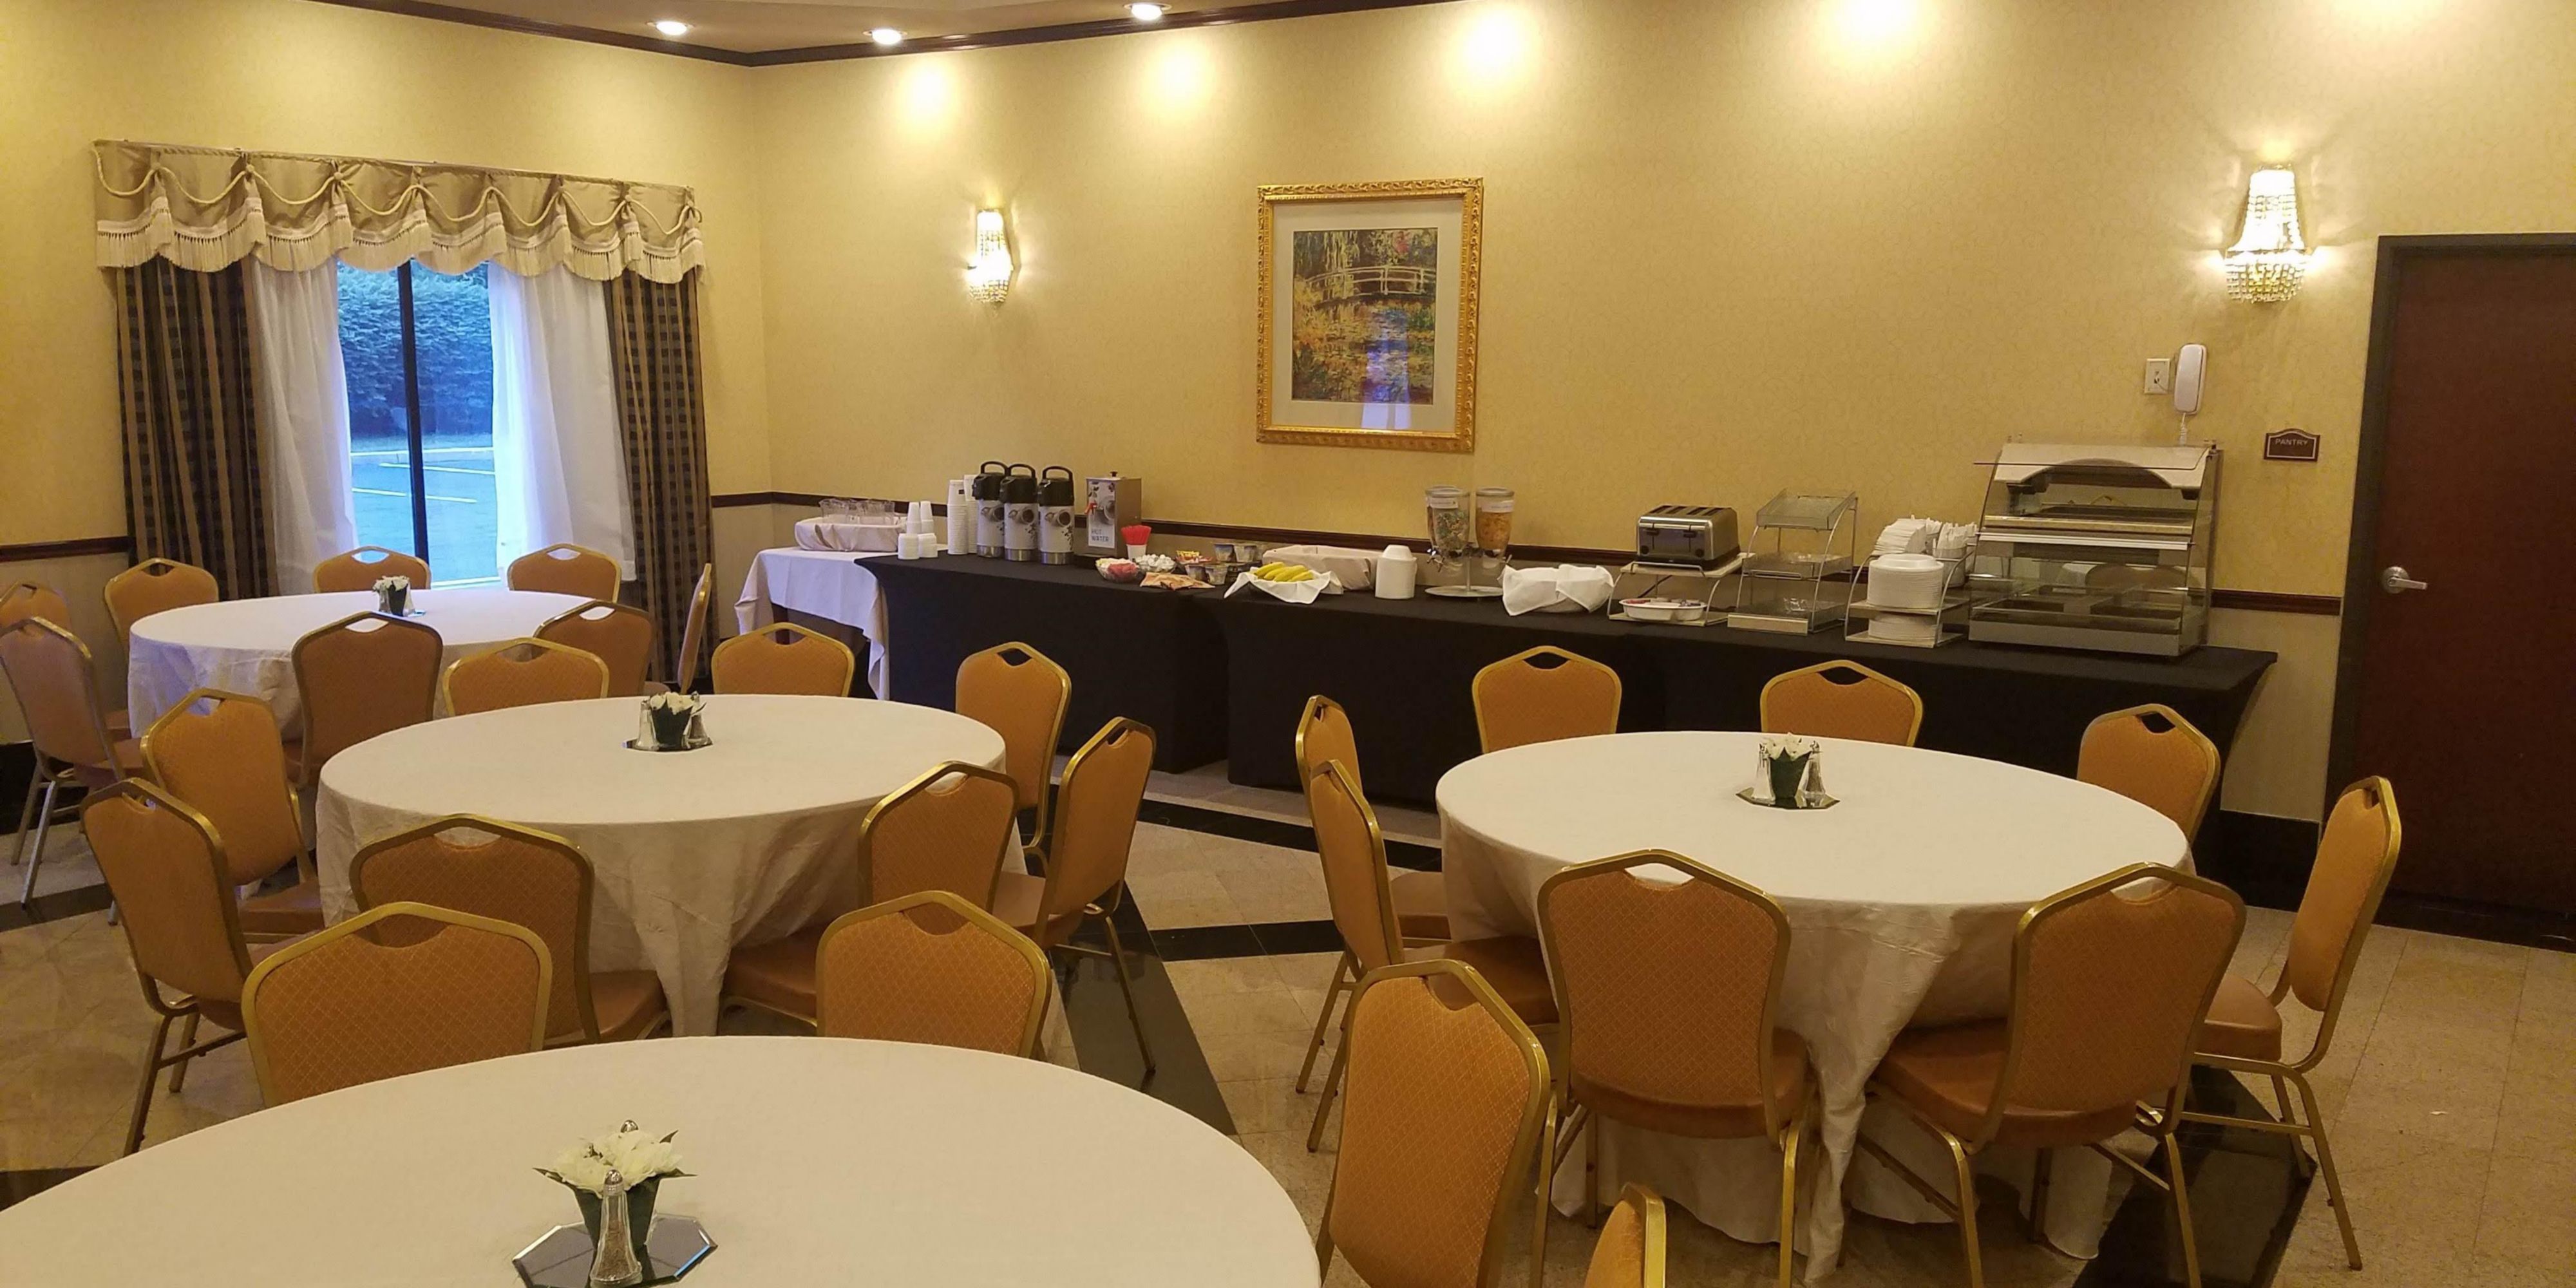 Our Crystal Room is available for your next business meeting or social gathering. 650 sq. ft space available in the set up of your choice. Contact our sales department today for pricing and availability. 